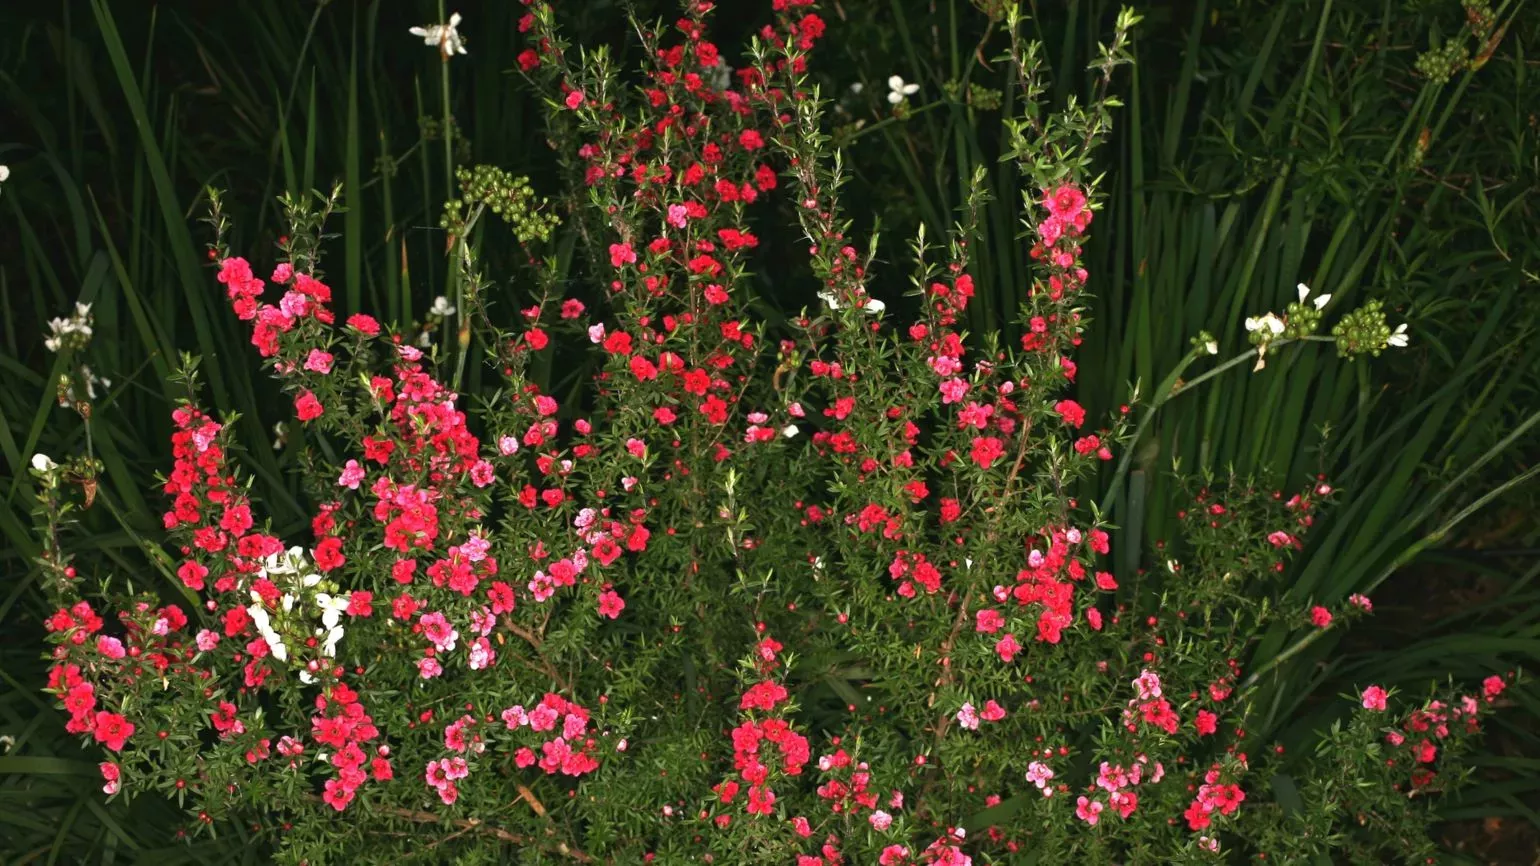 Evergreen shrub, pink flowers, and rigid leaves with a sharp tip of the manuka plant